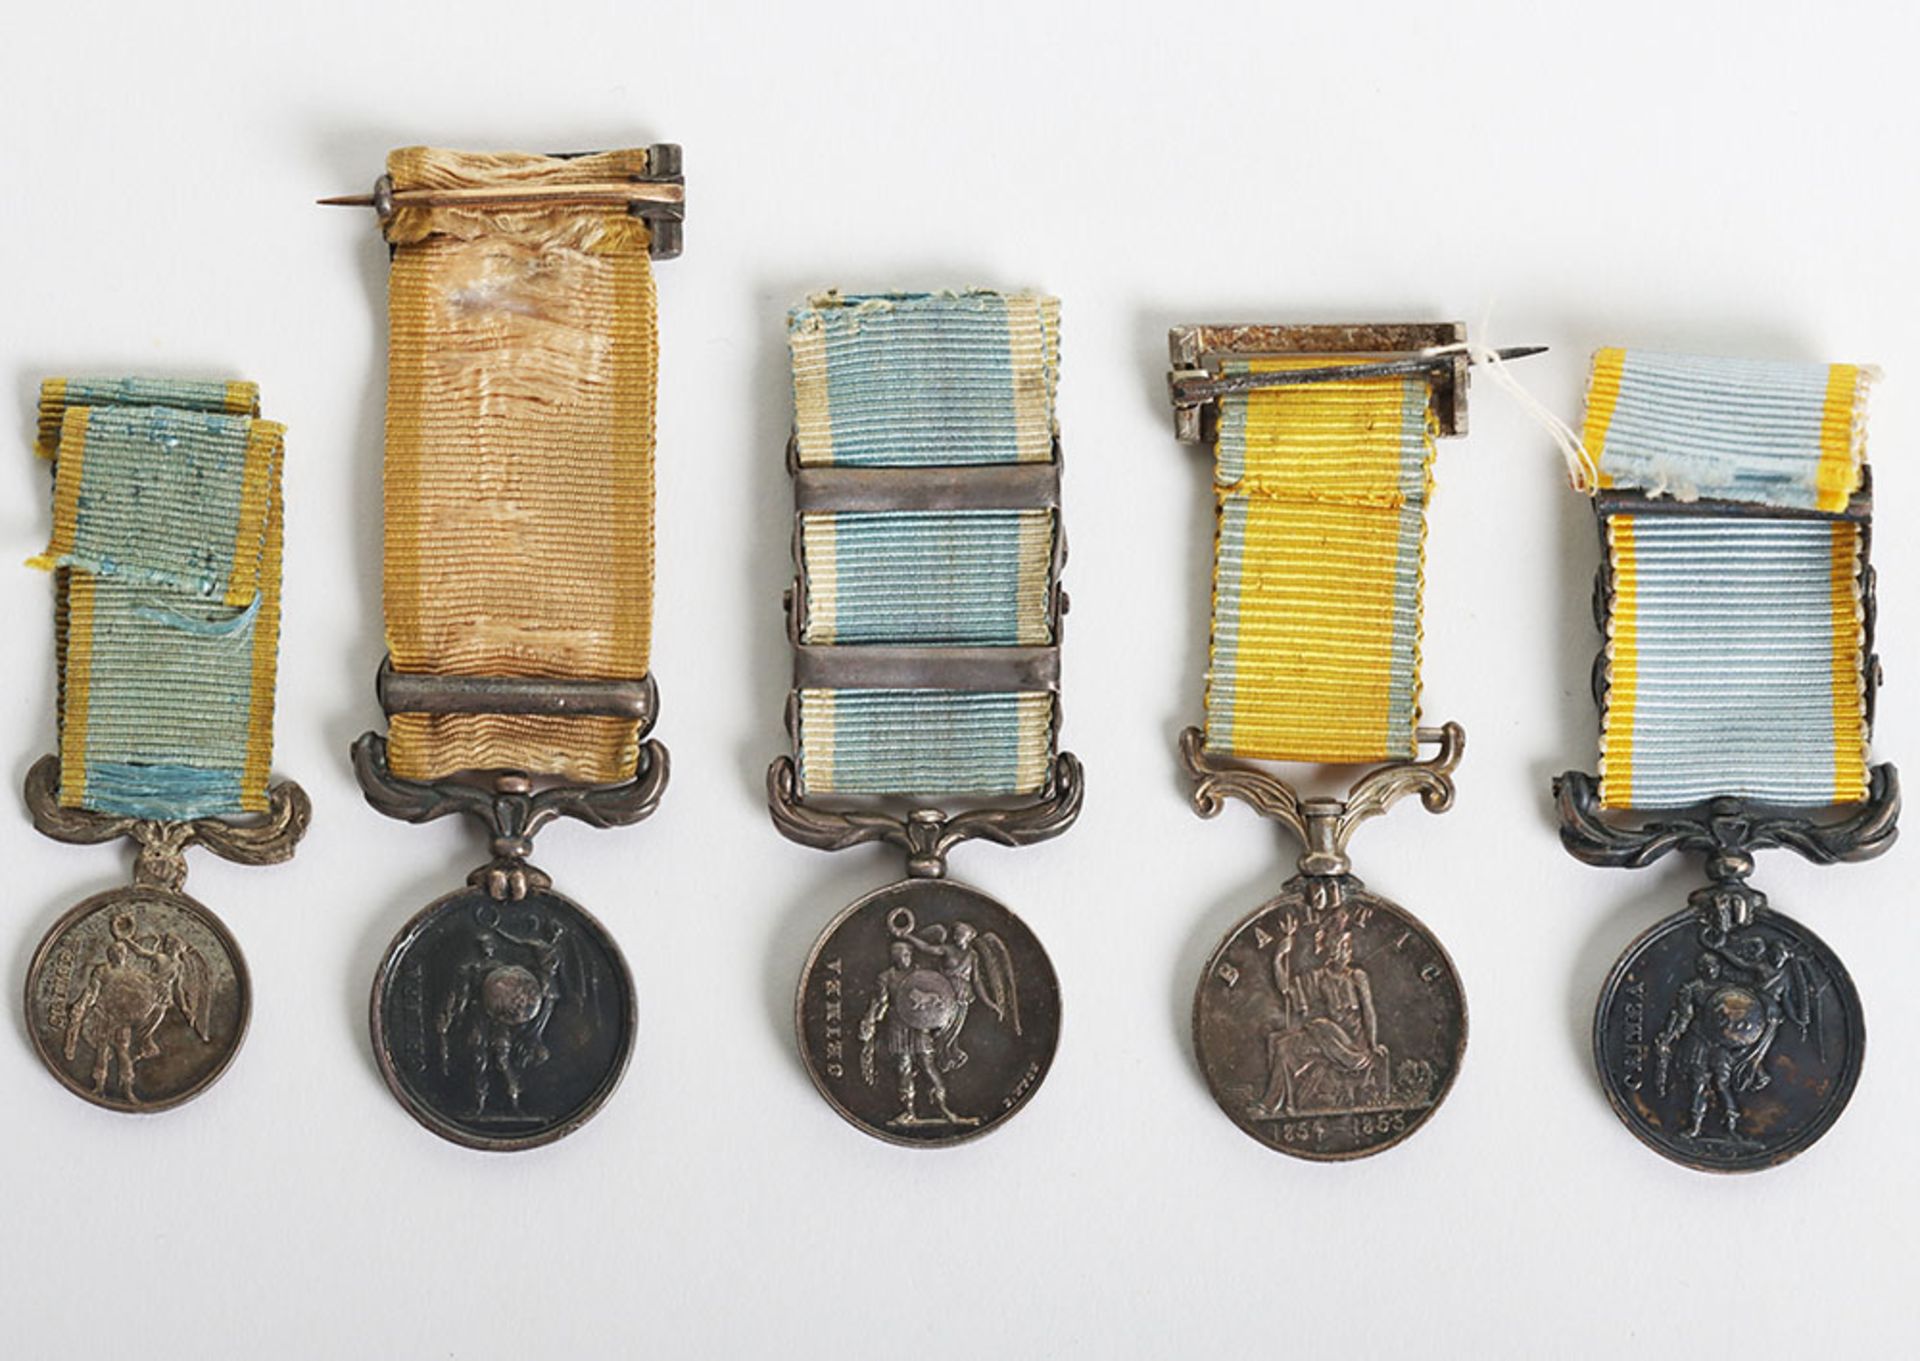 Collection of 5 Contemporary Victorian Miniature Medals for Service in the Crimea and the Baltic - Image 5 of 9